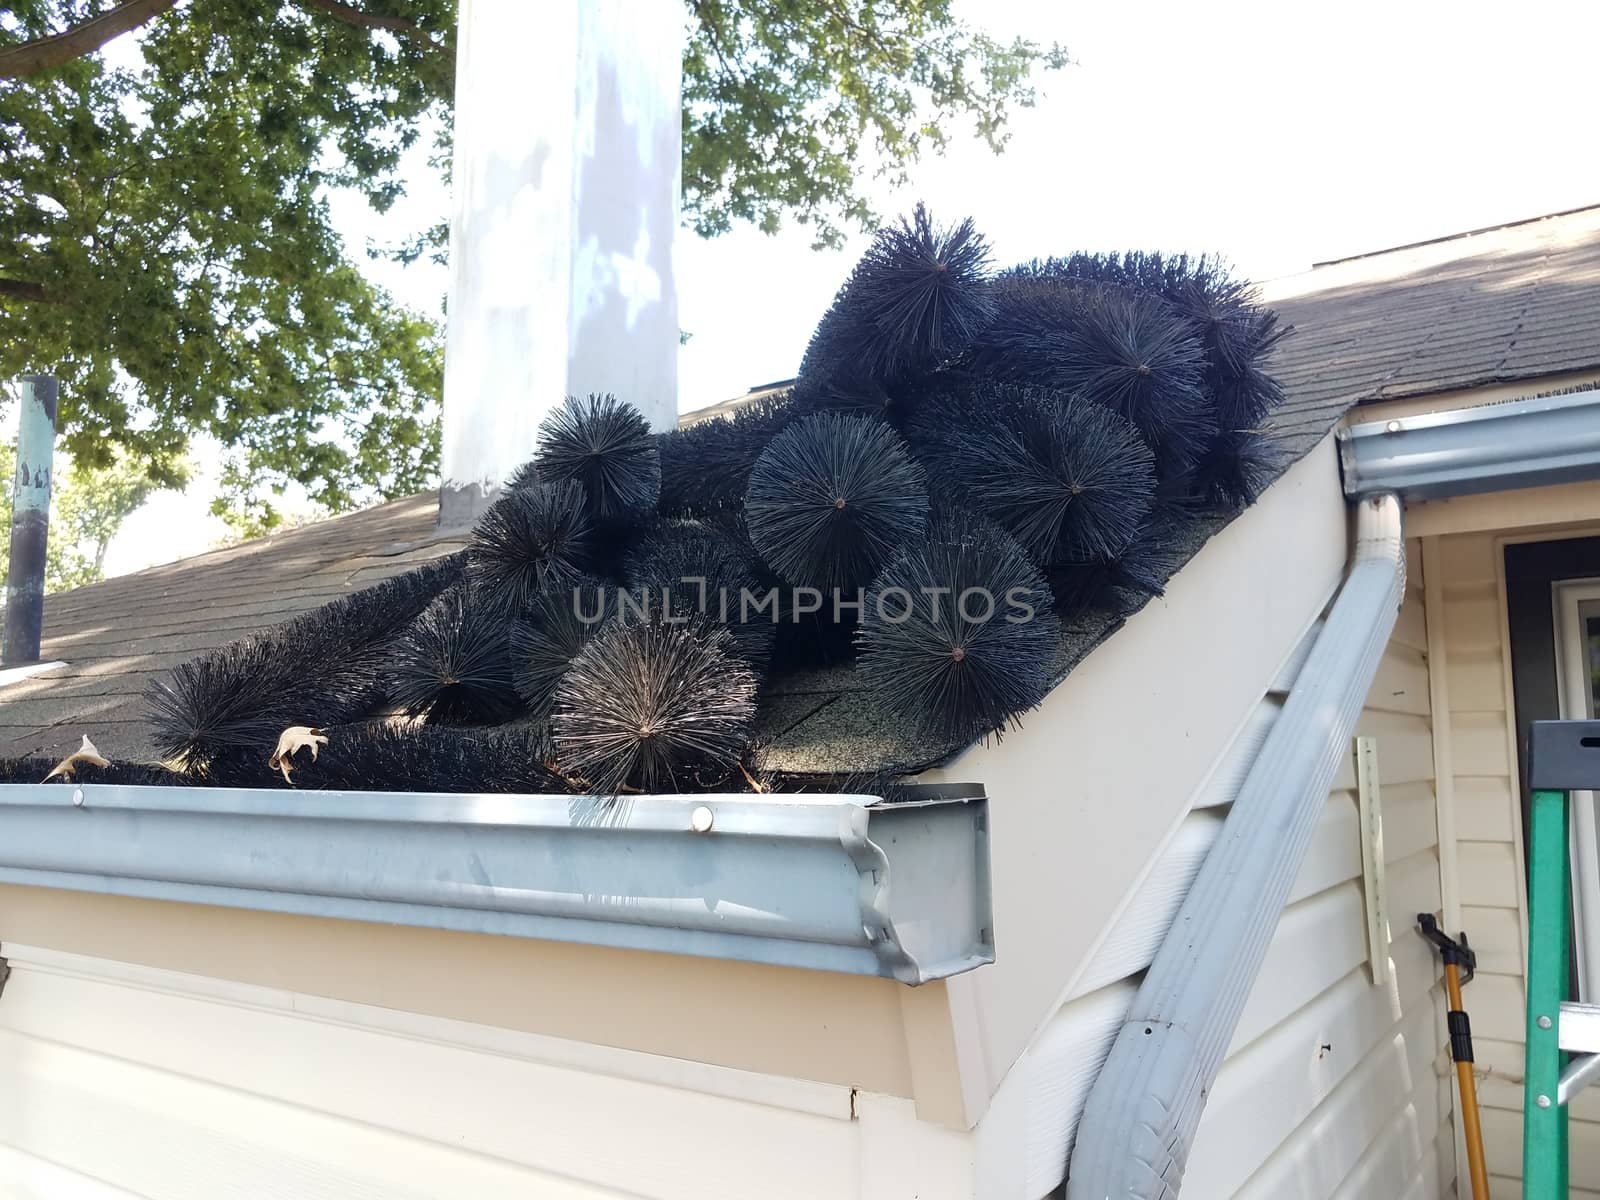 black pipe cleaner and gutter with roof shingles on house